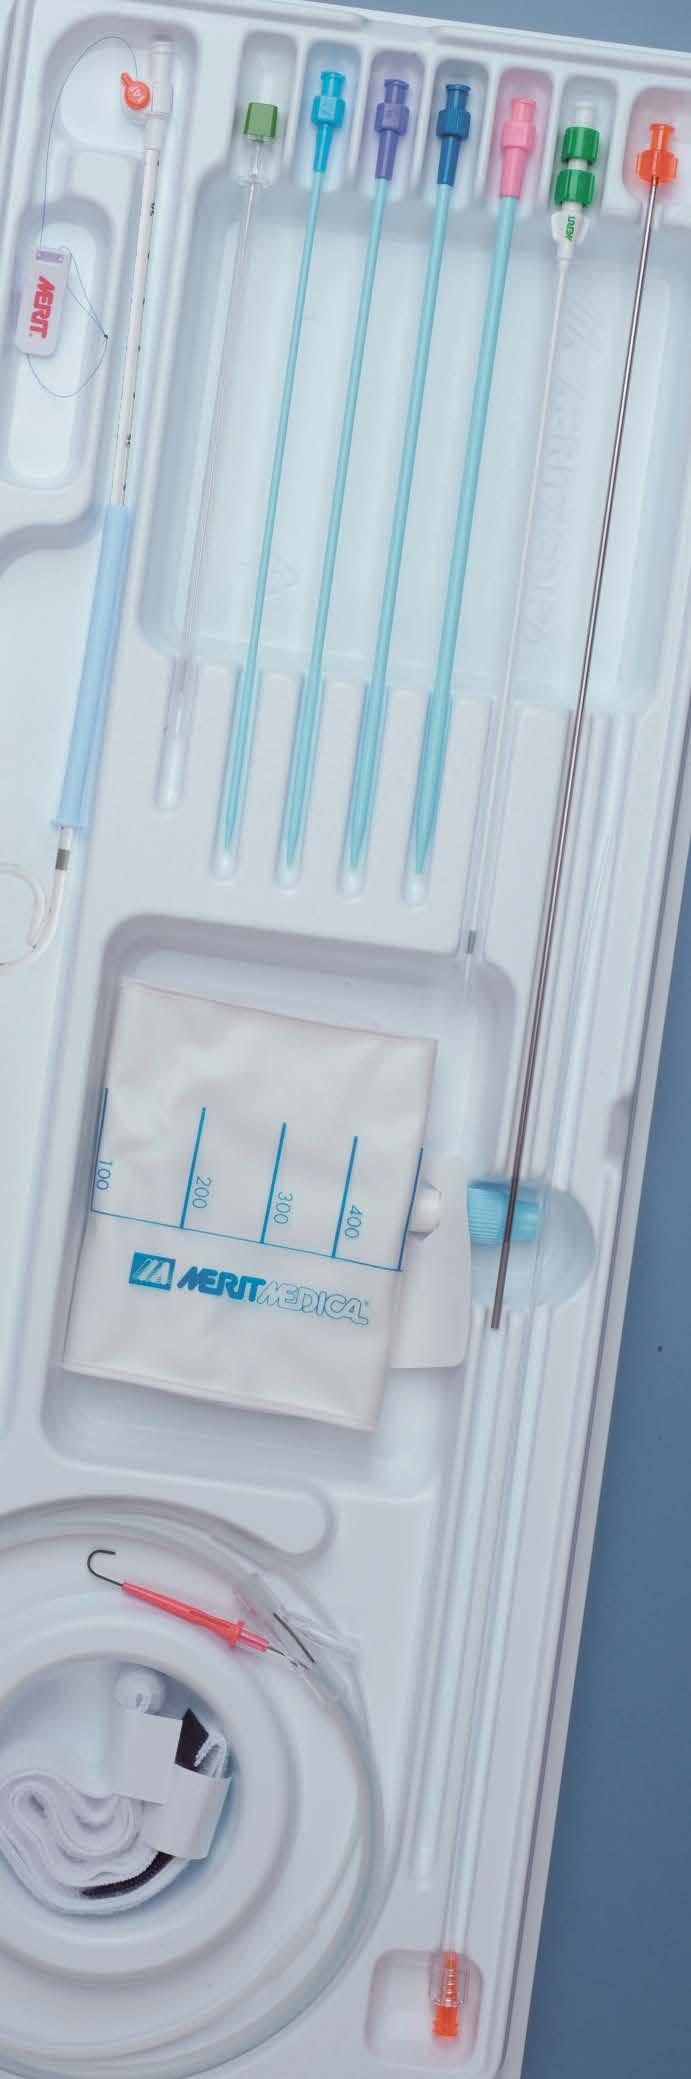 Drainage Catheter Trays Conveniently containing the ReSolve Locking Drainage Catheter, MAK-NV Introducer System, Merit Drainage Depot Drainage Bag, and dilators, the ReSolve trays offer all you need